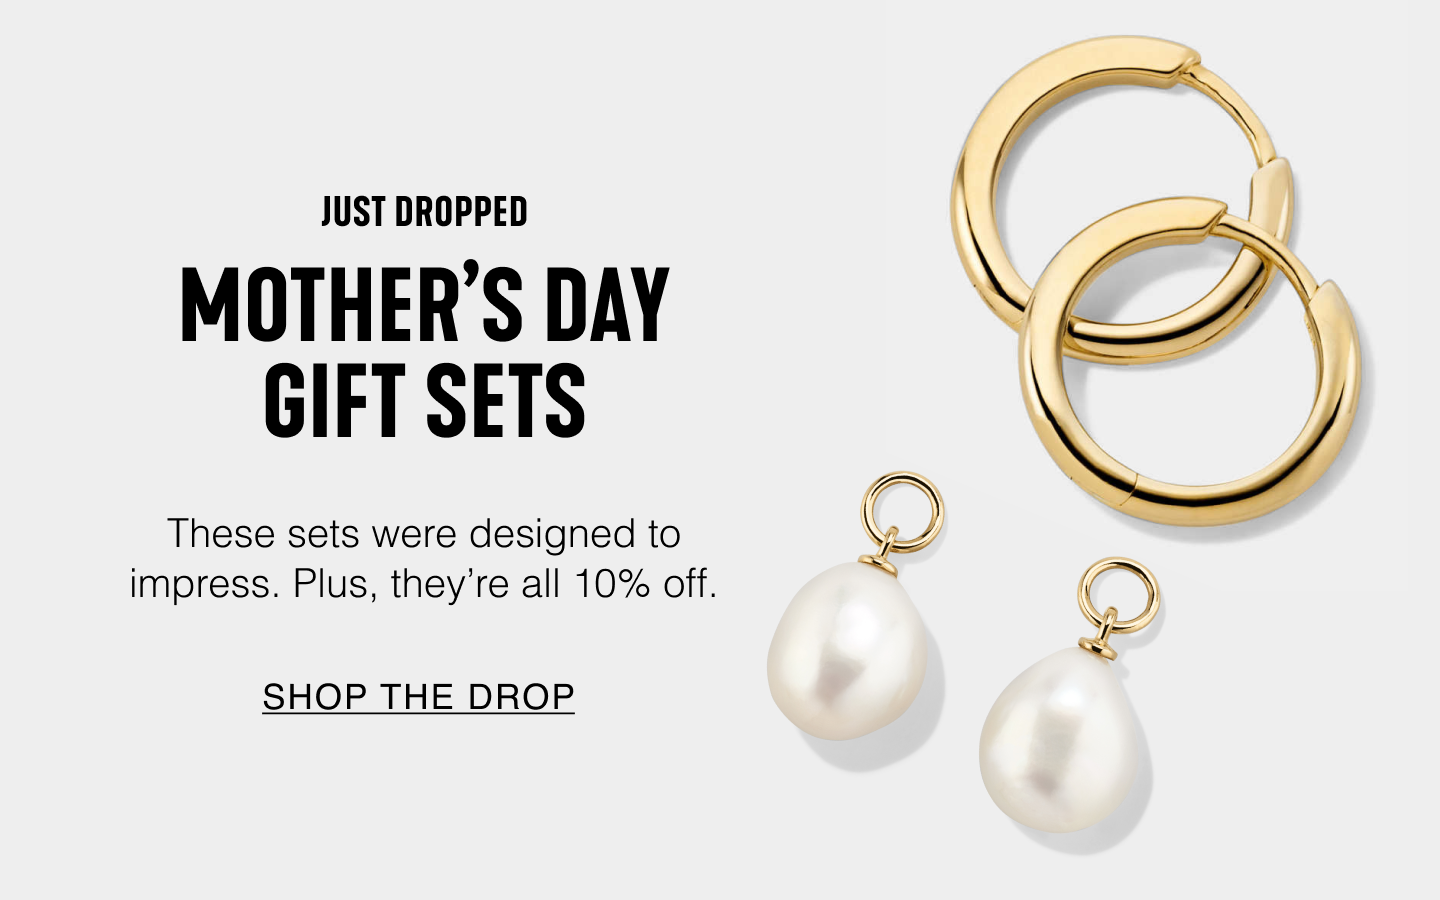 Just Dropped. Mother's Day Gift Sets. These sets were designed to impress. Plus, they're all 10% off. Shop the Drop.